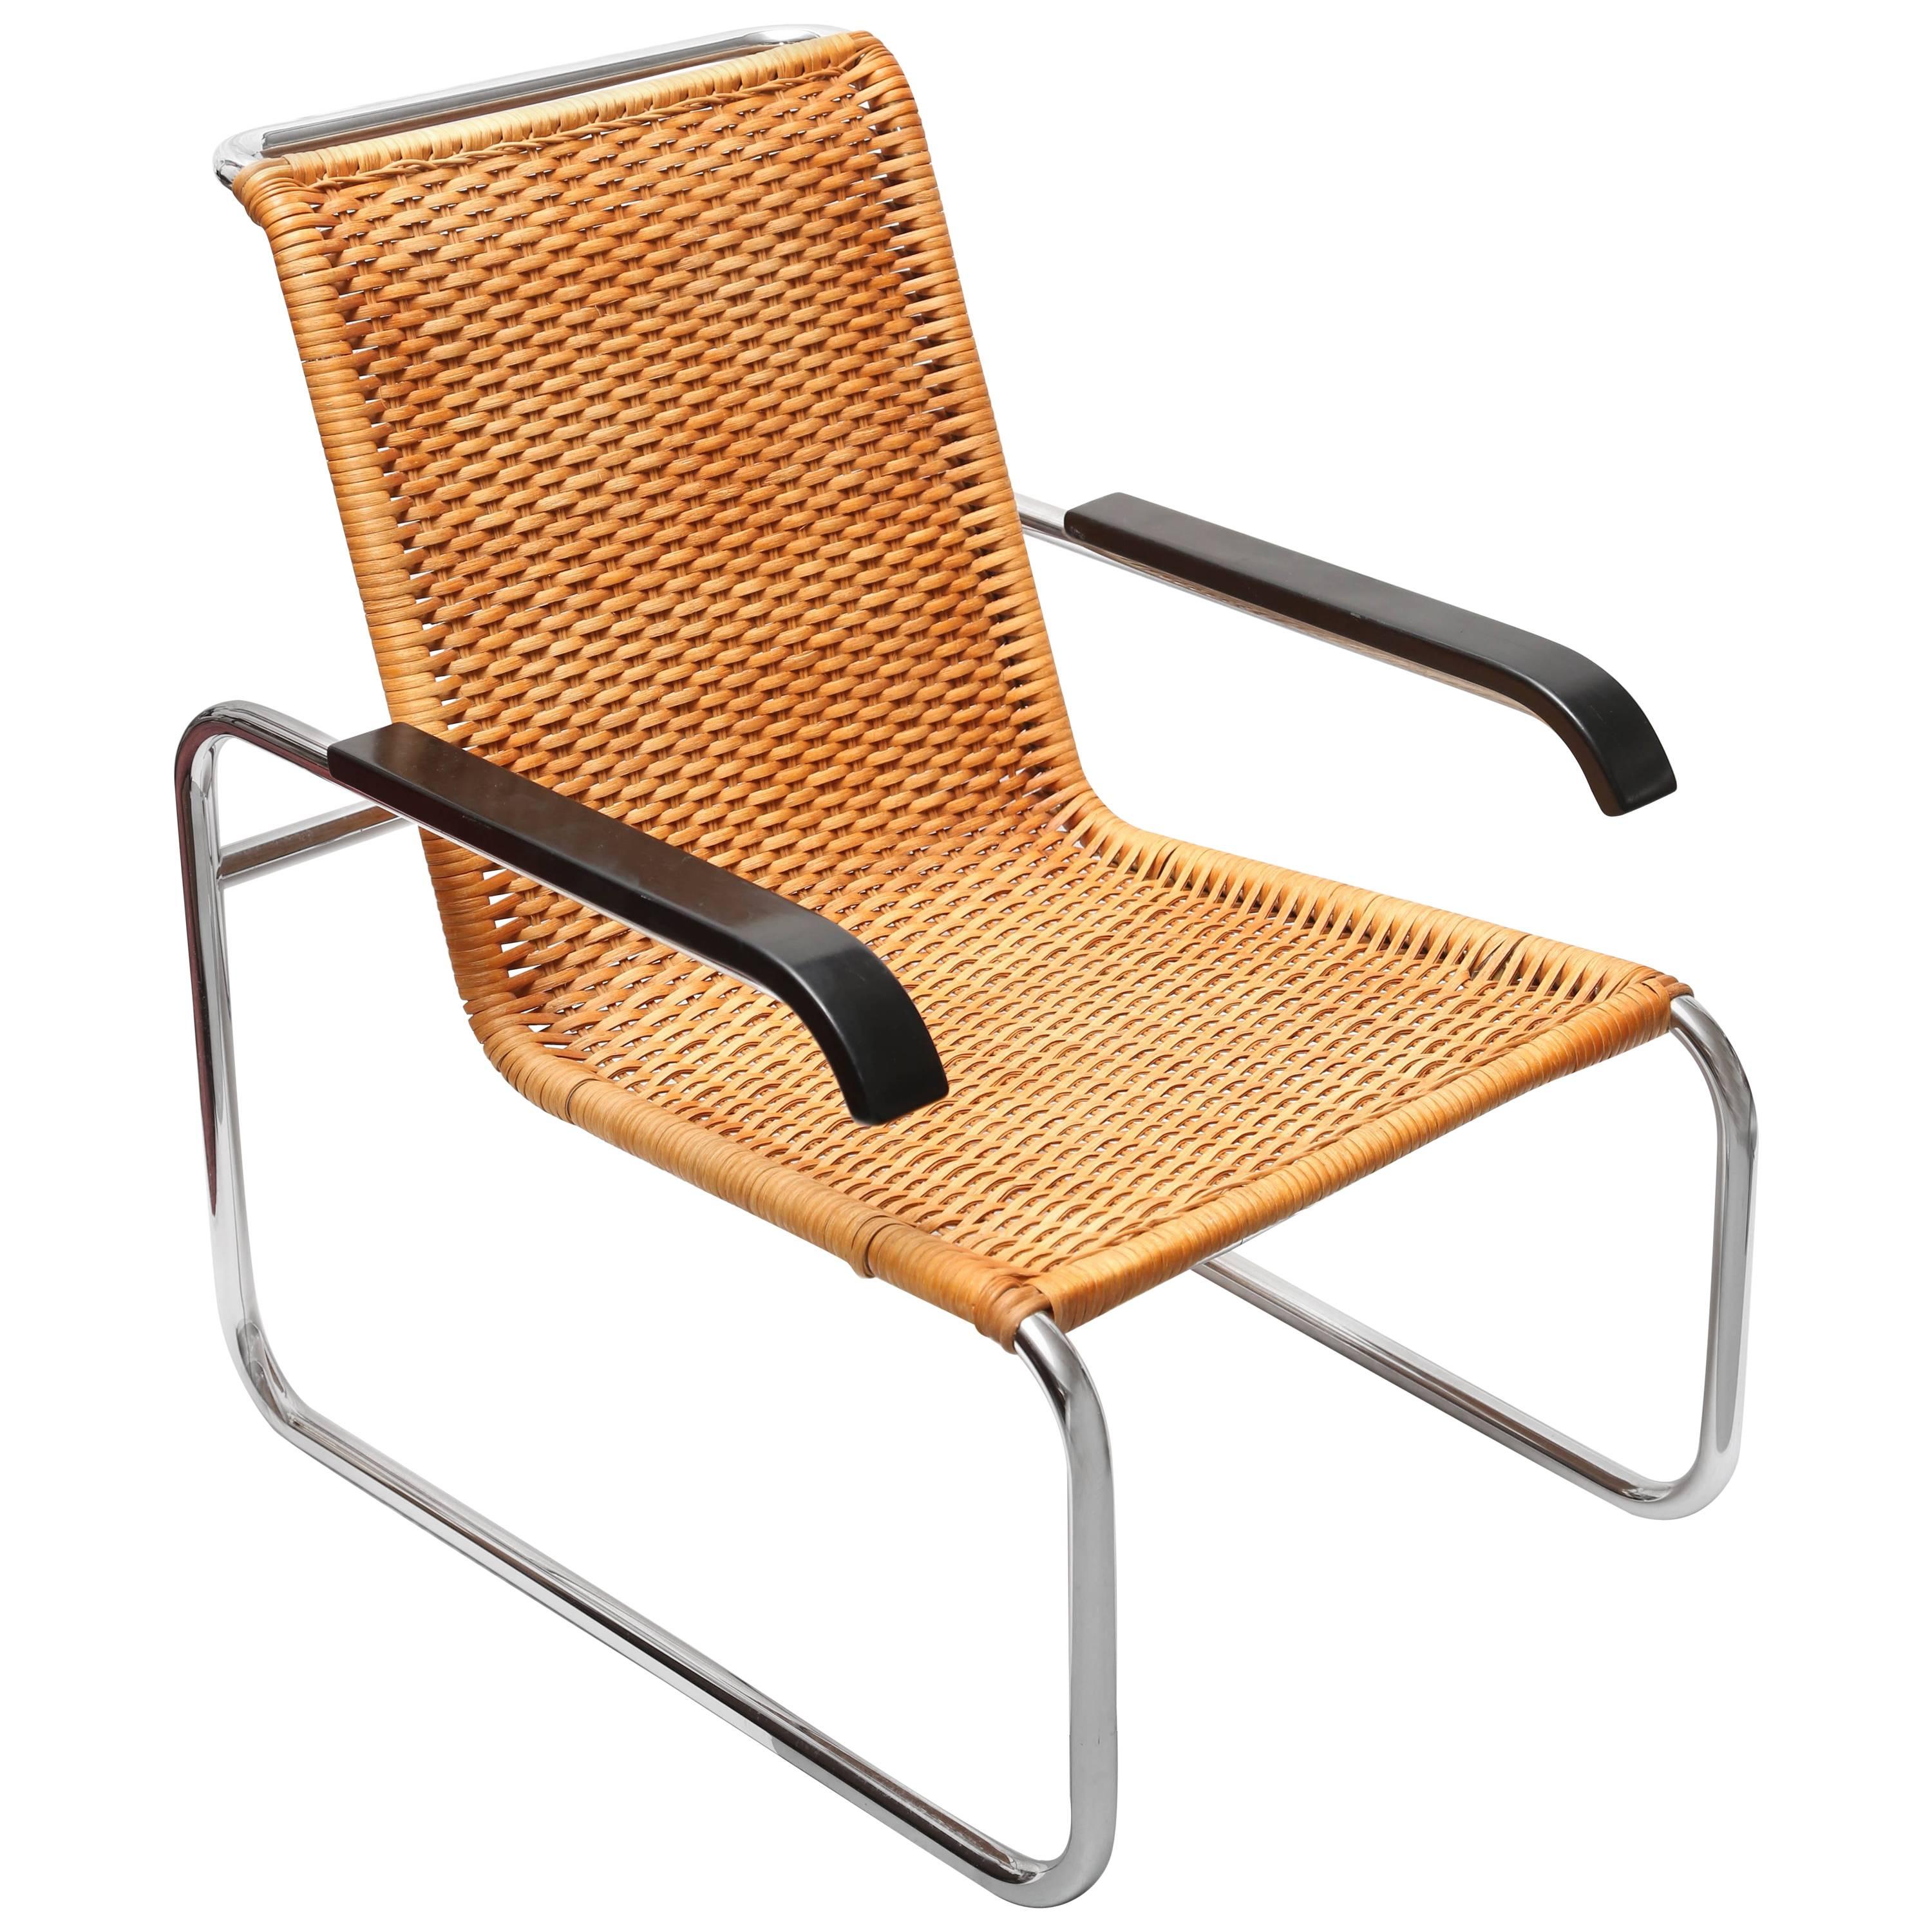 Mid-20th Century Marcel Breuer for Thonet B35 Rattan Lounge Chair with Changeable Armrests